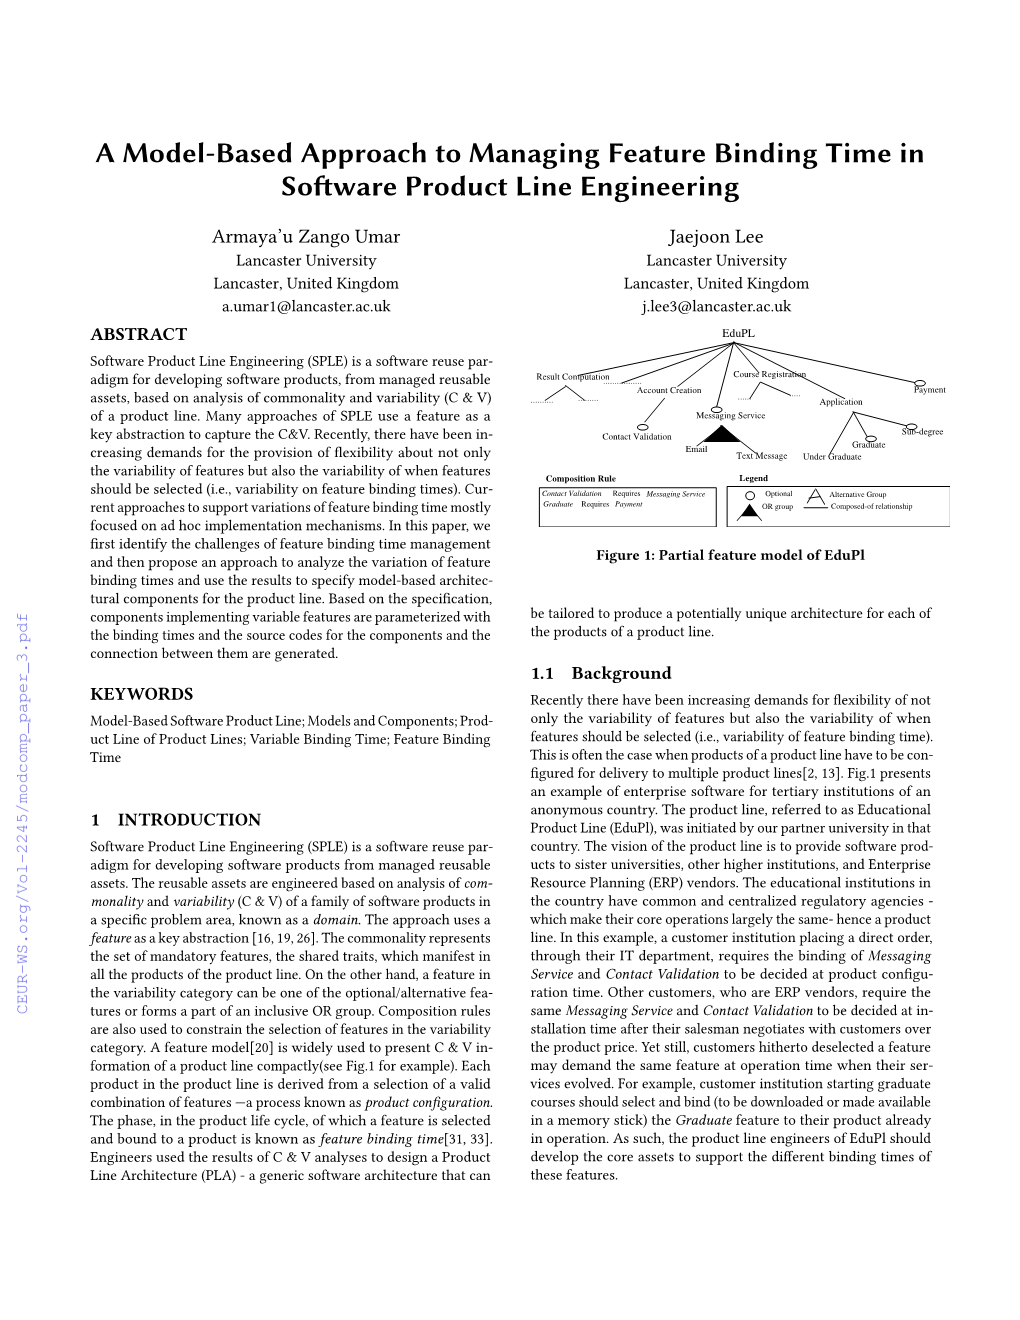 A Model-Based Approach to Managing Feature Binding Time in Software Product Line Engineering